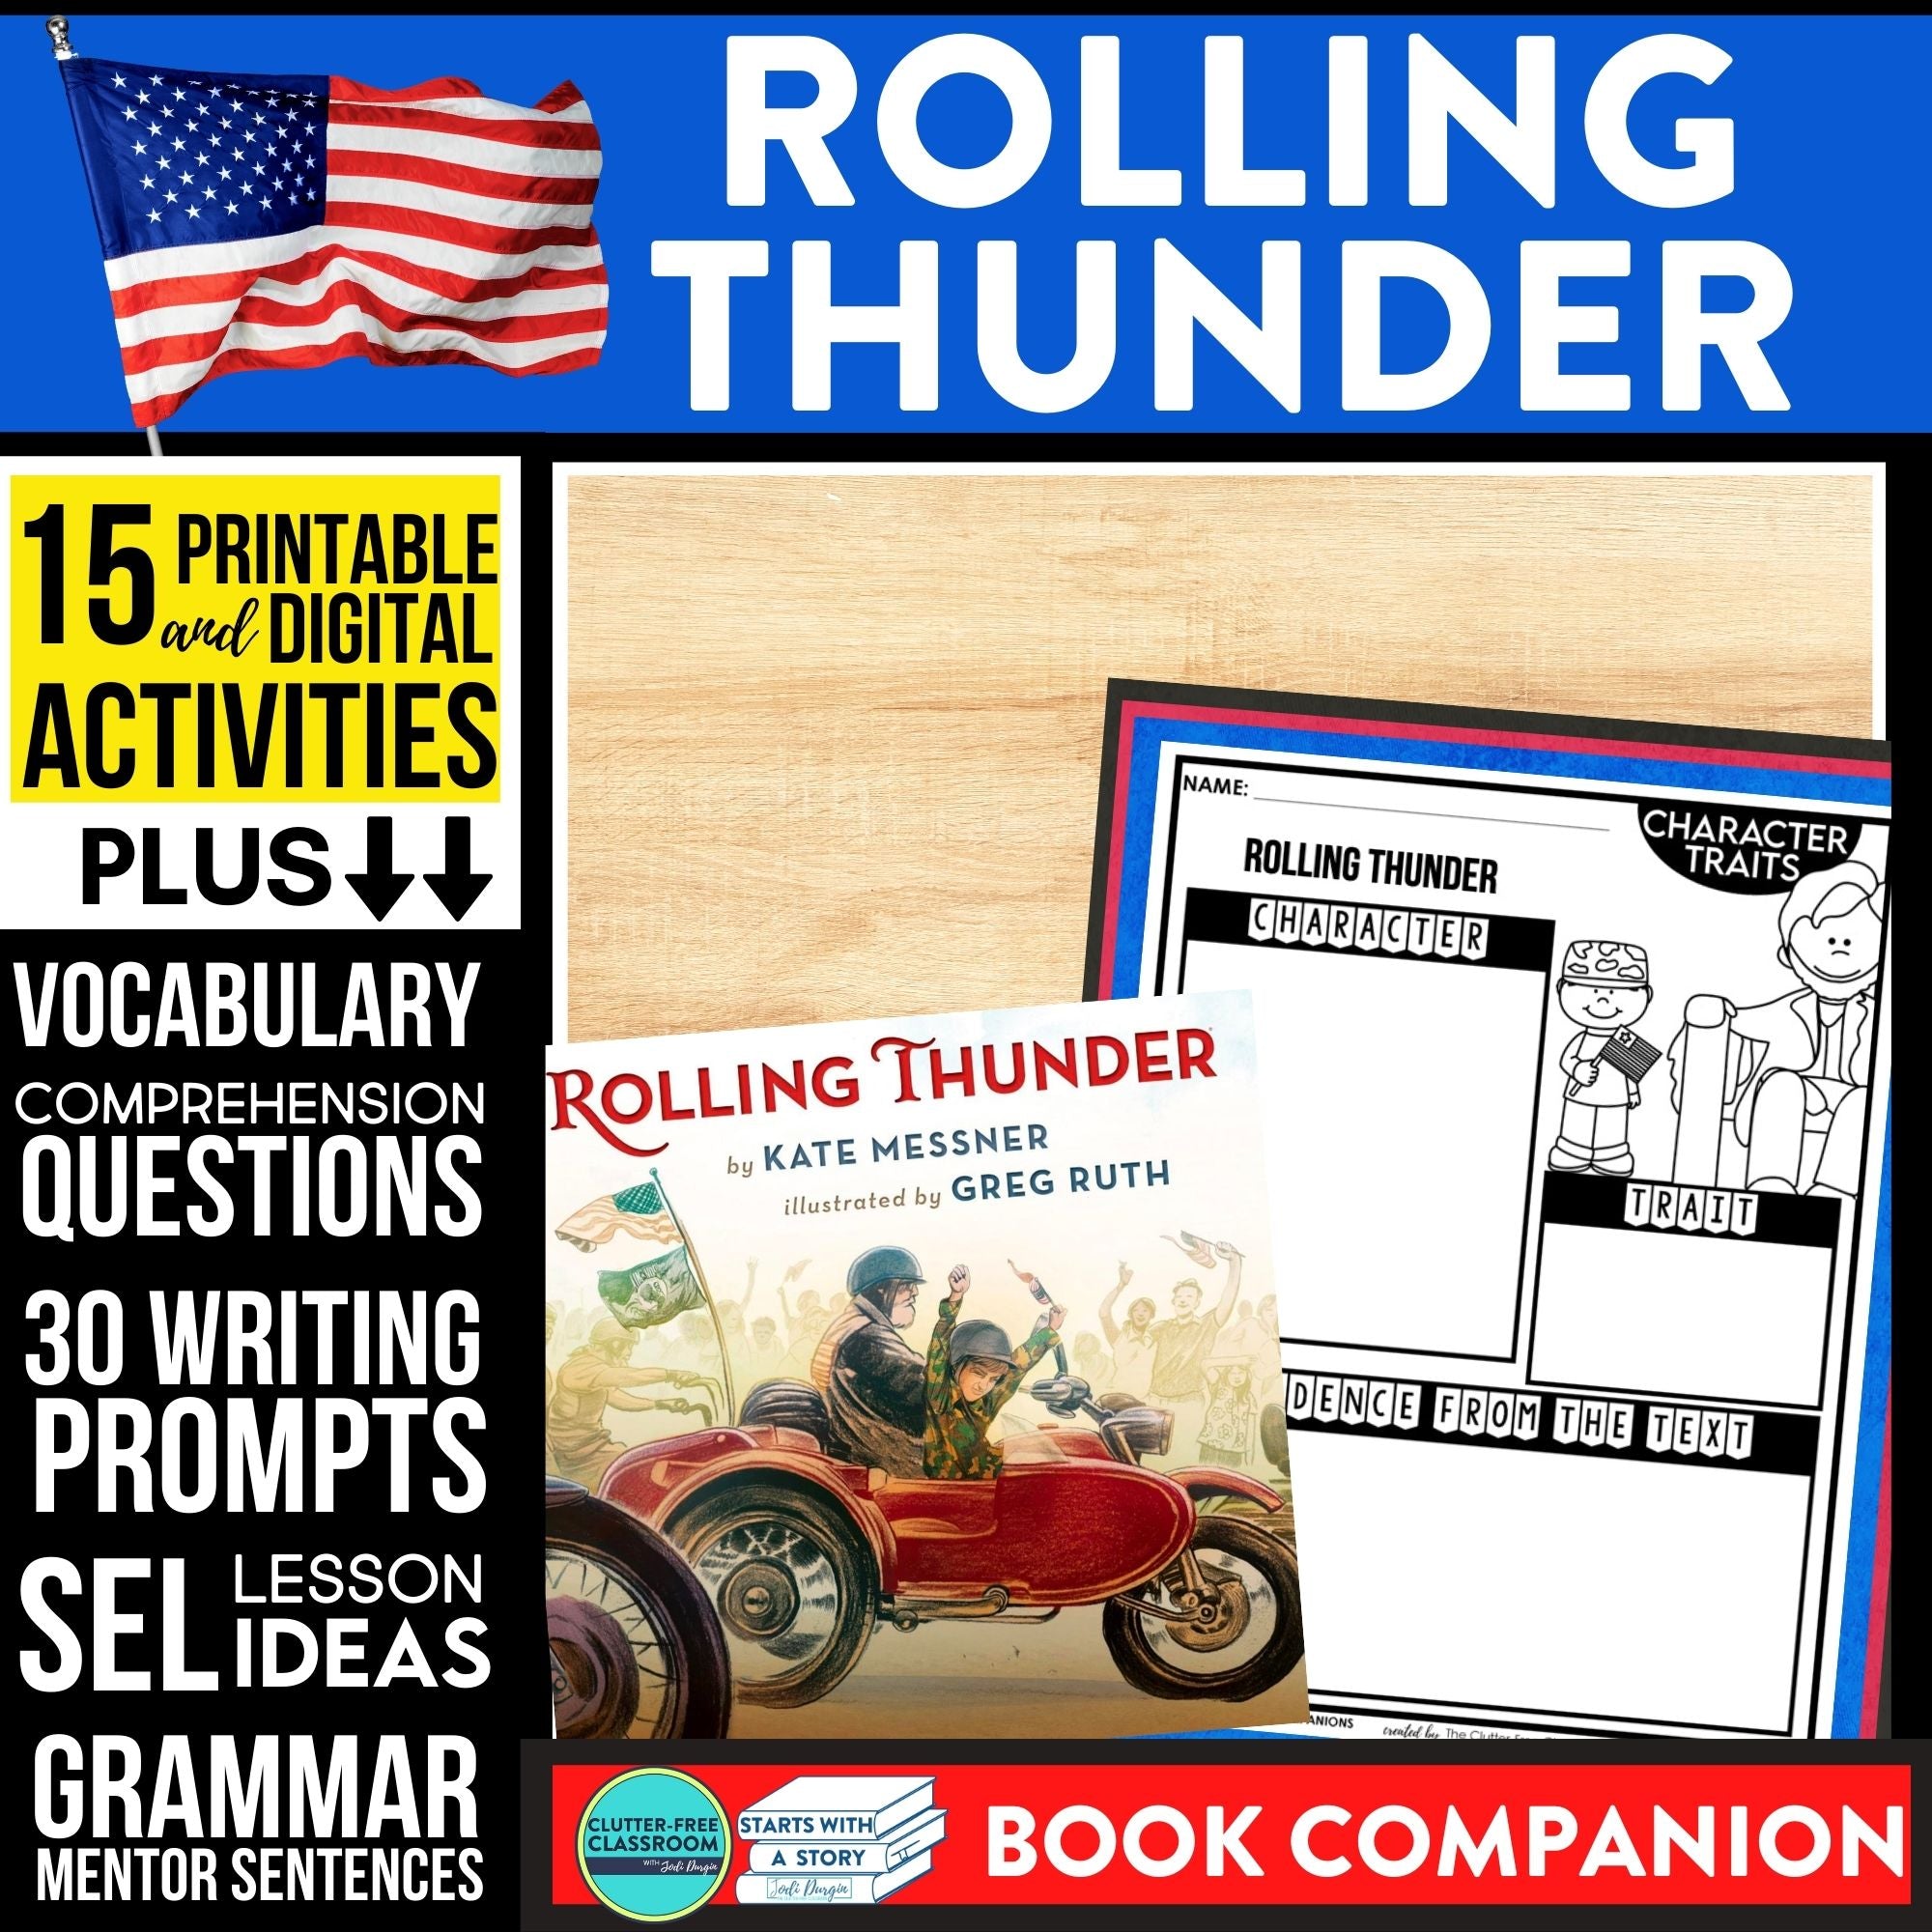 ROLLING THUNDER activities and lesson plan ideas